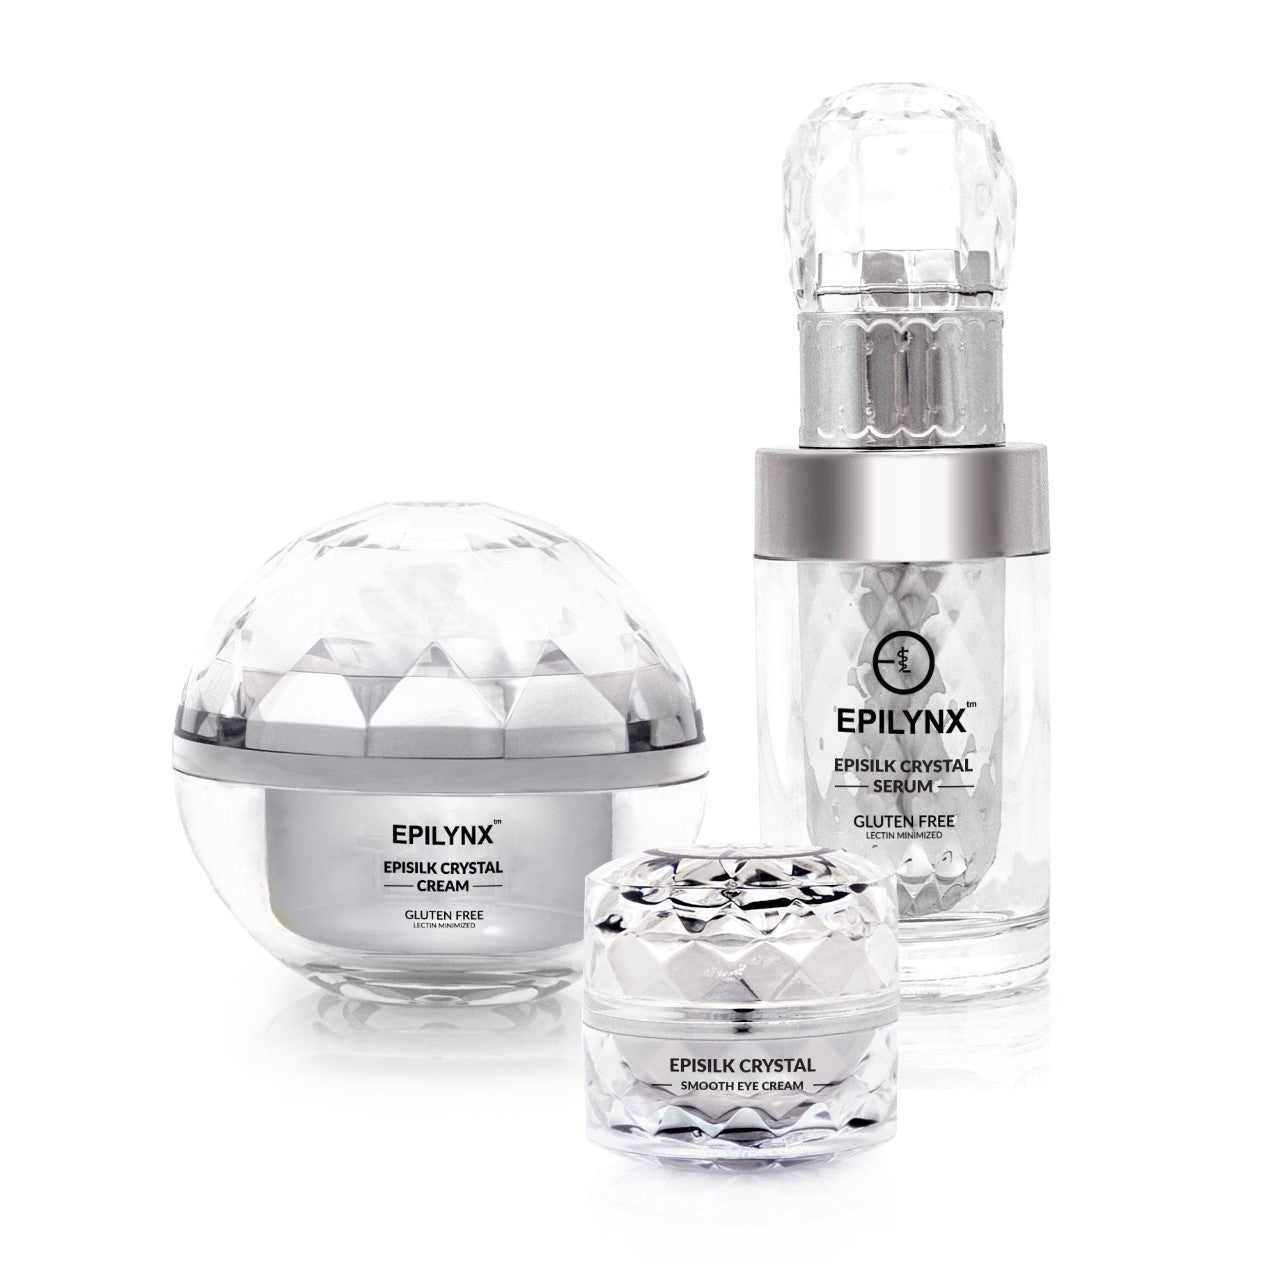 Soothing, Hydrating Face Treatment – Reducing Wrinkles and Fine Lining